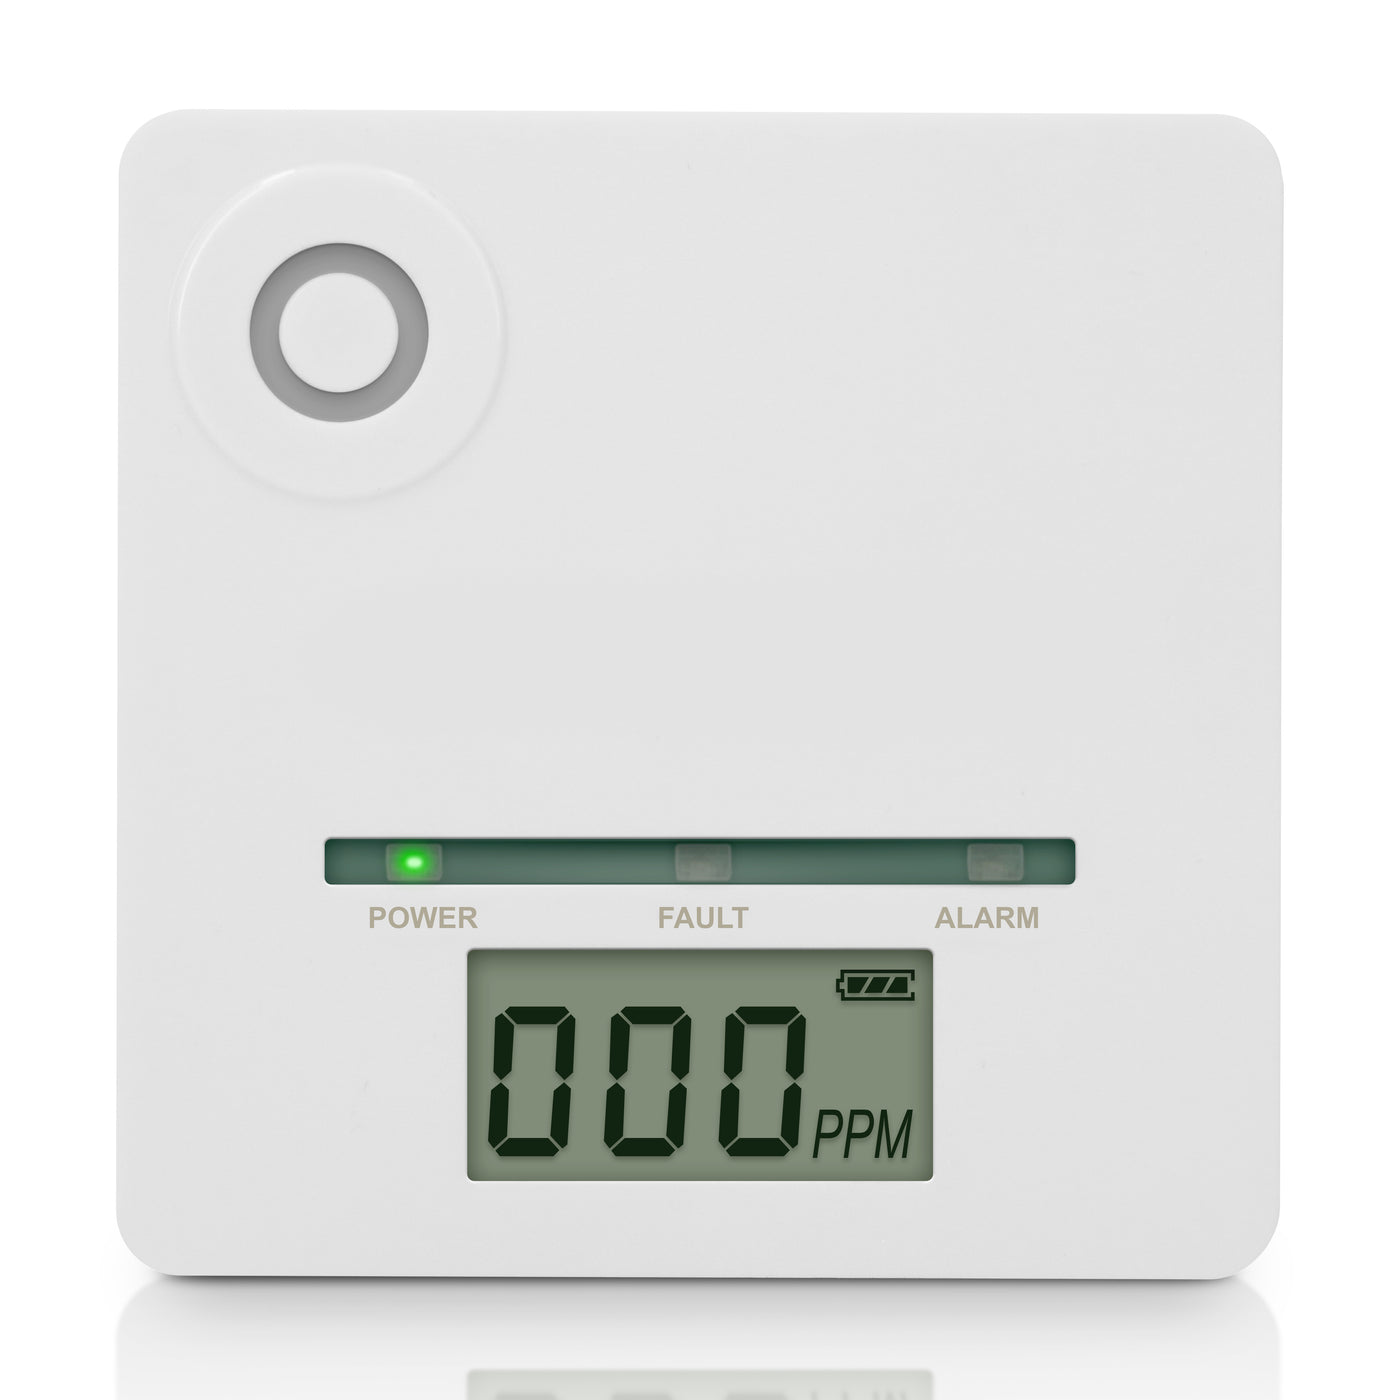 Alecto COA26 - Low level carbon monoxide alarm (>5ppm) with 10 years sensor runtime and temperature display, white